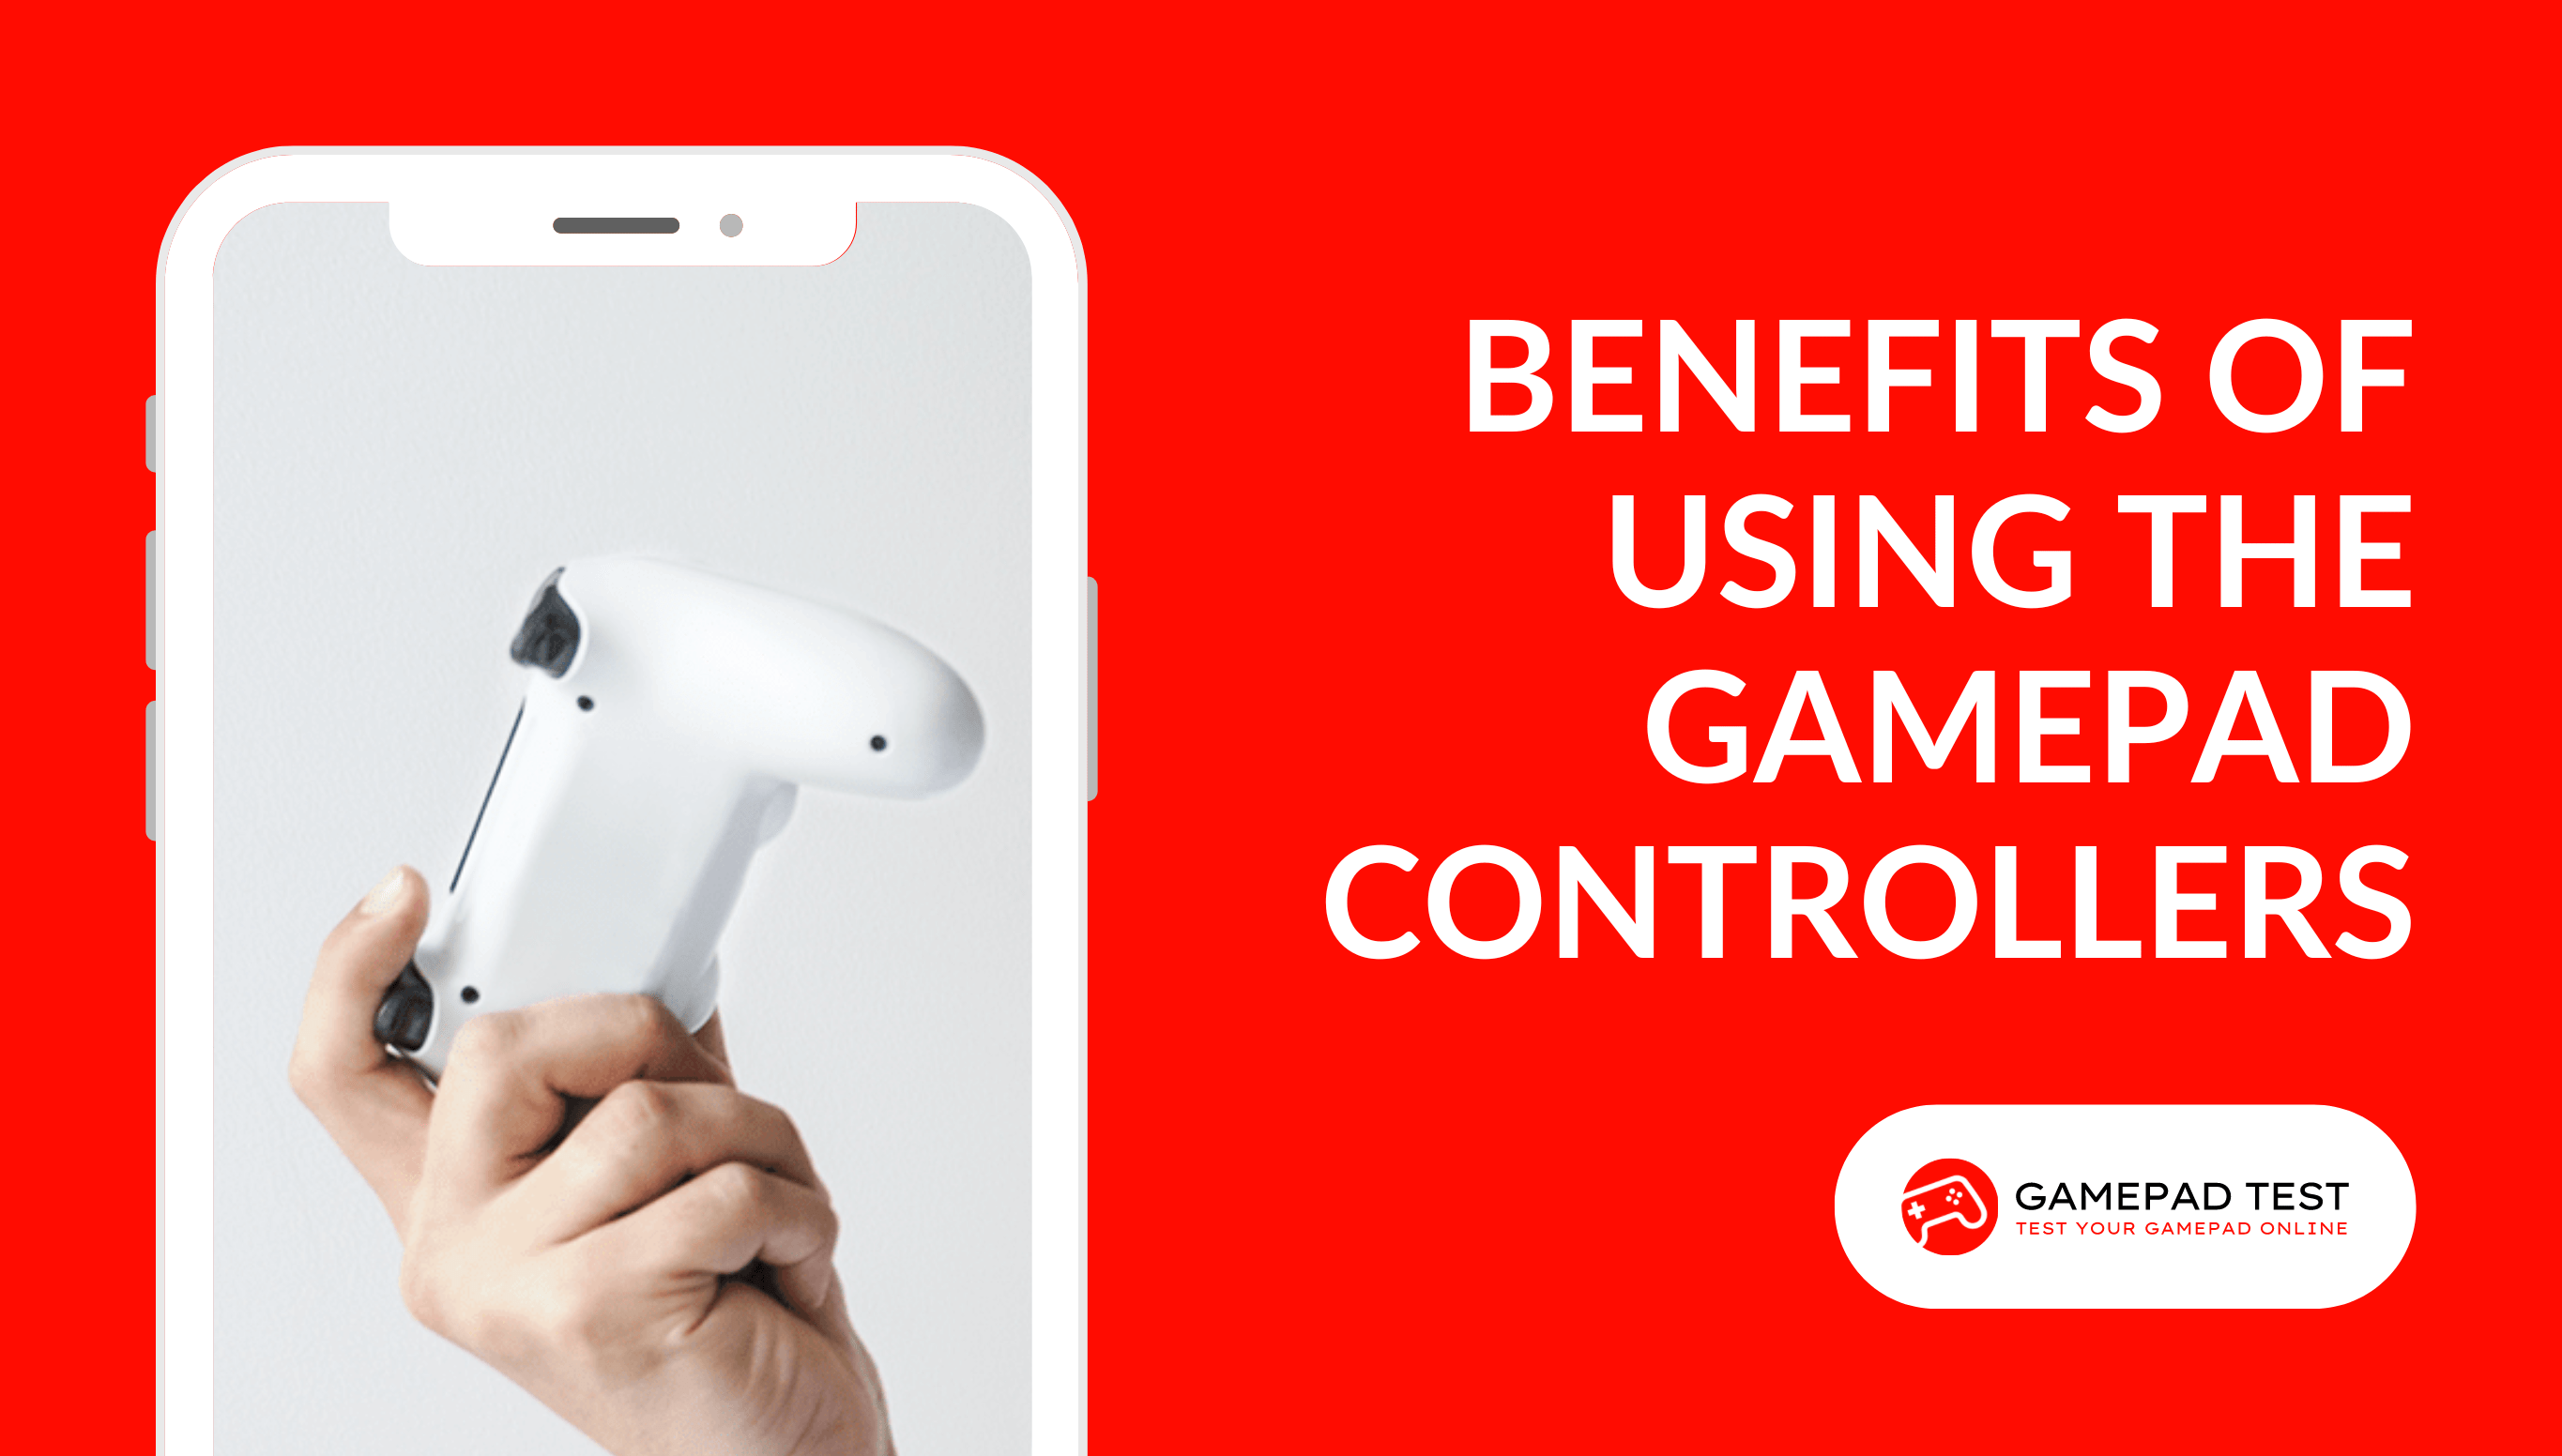 Benefits Of Using The Gamepad Controllers - Blog Featured Image - gamepadtest.com